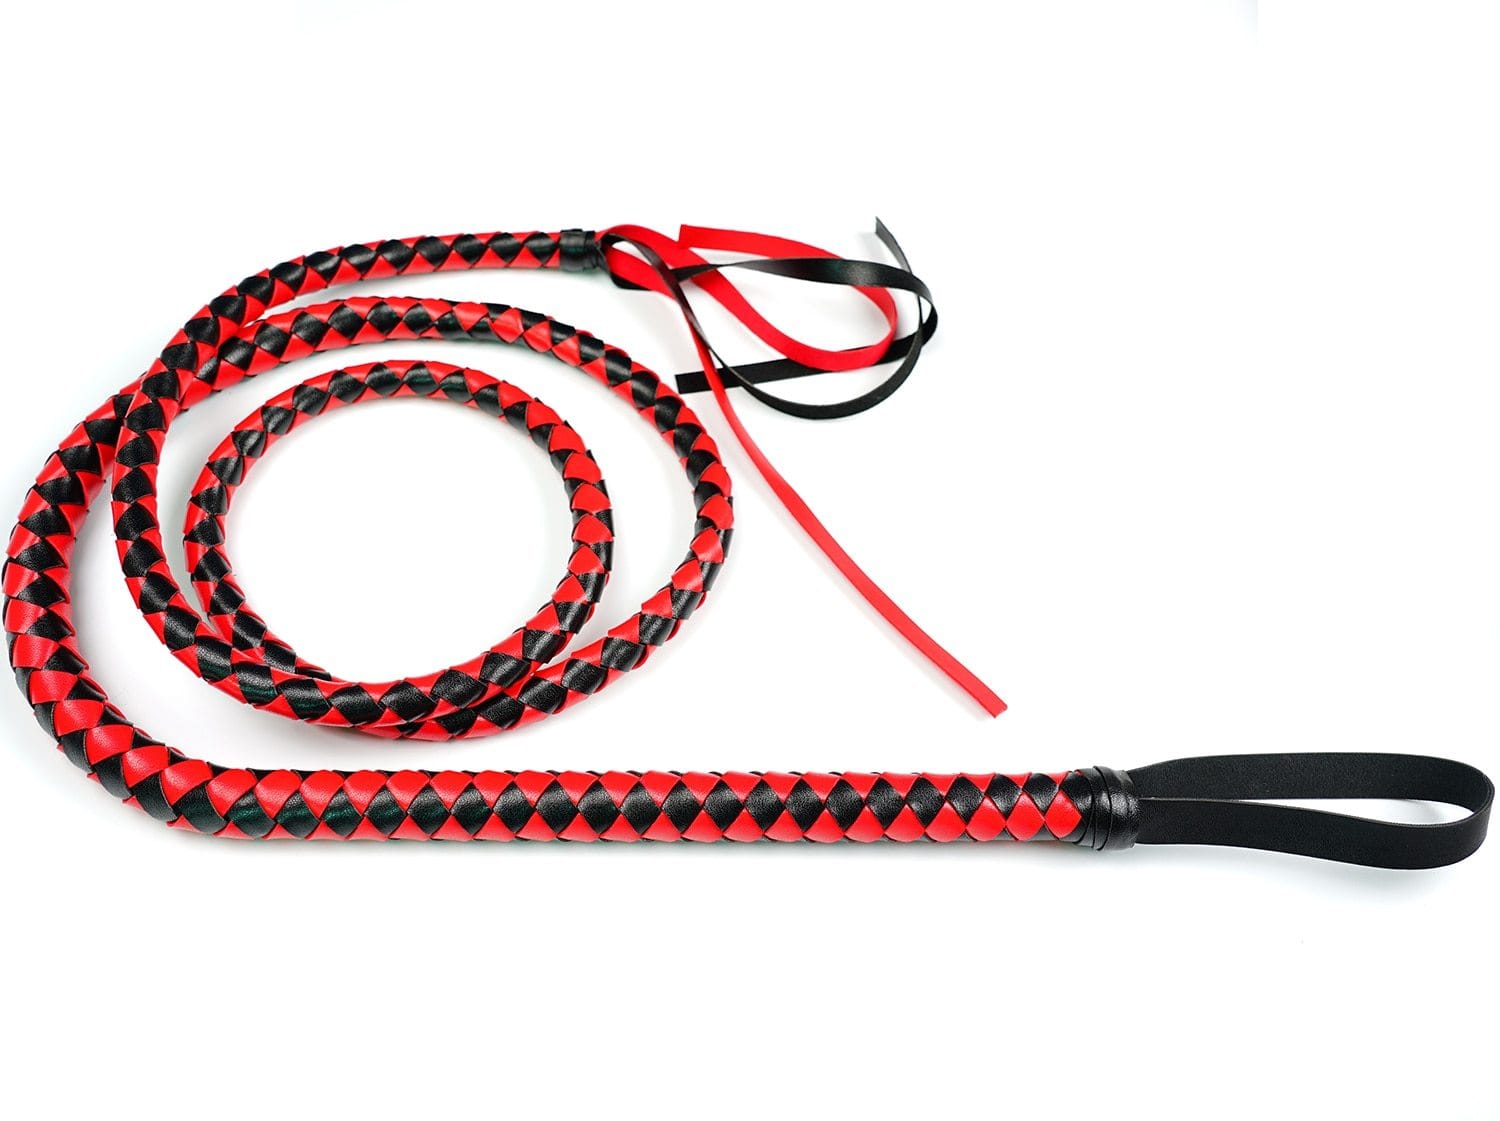 In the photograph, you can see an image of Genuine Cow Leather BDSM Whip in White and Black color, crafted for power play and control.